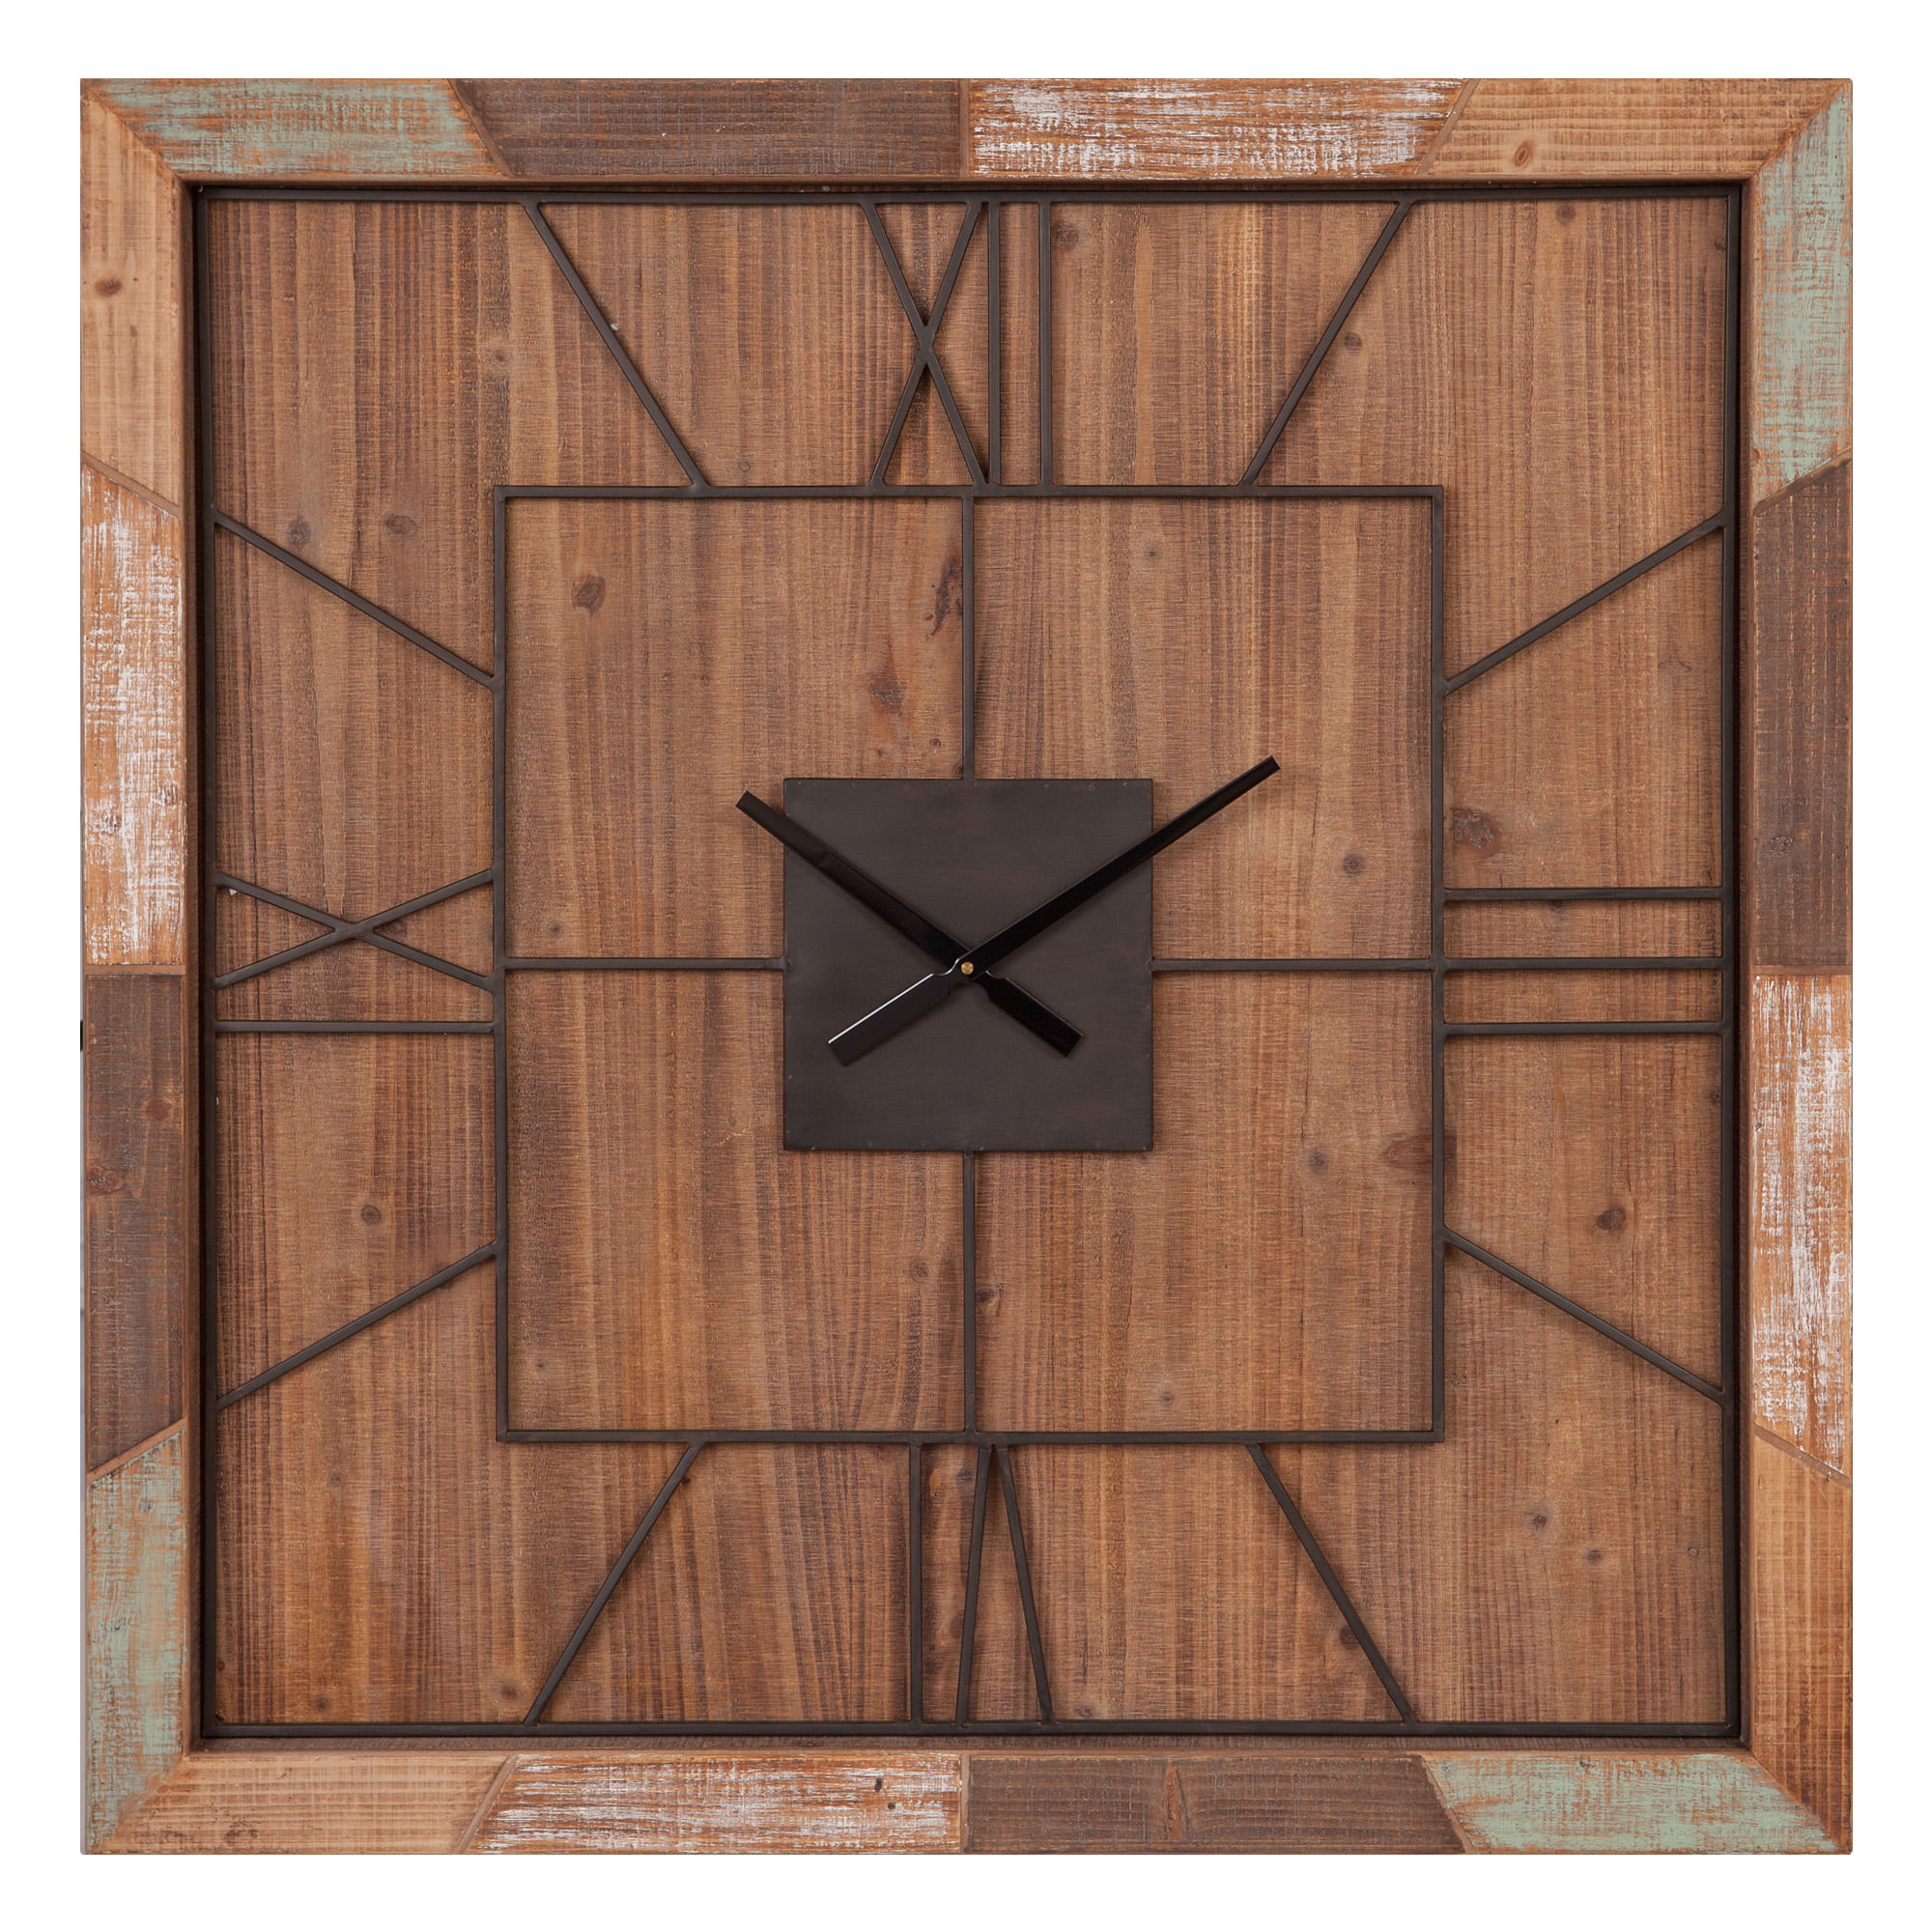 Placed on Old Wooden Planks Decorative Wall Clock for Wall Decor INTERESTPRINT USA Flag in Grunge Design